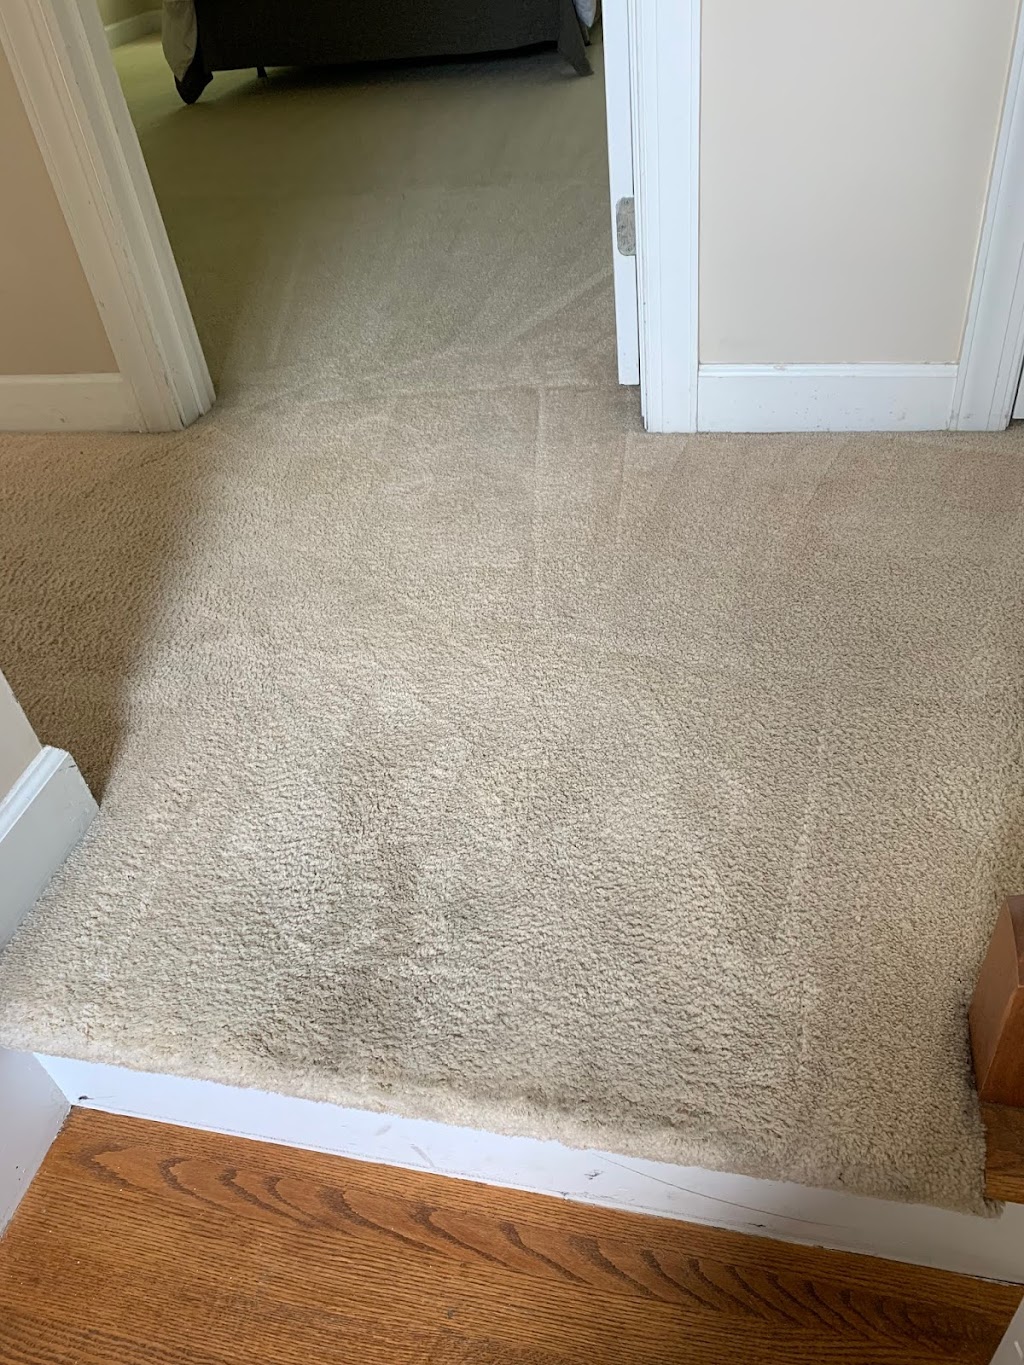 A Step Ahead Carpet and Upholstery Cleaning Inc. | 505 Meadowlands Dr STE 105, Hillsborough, NC 27278, USA | Phone: (919) 730-8769